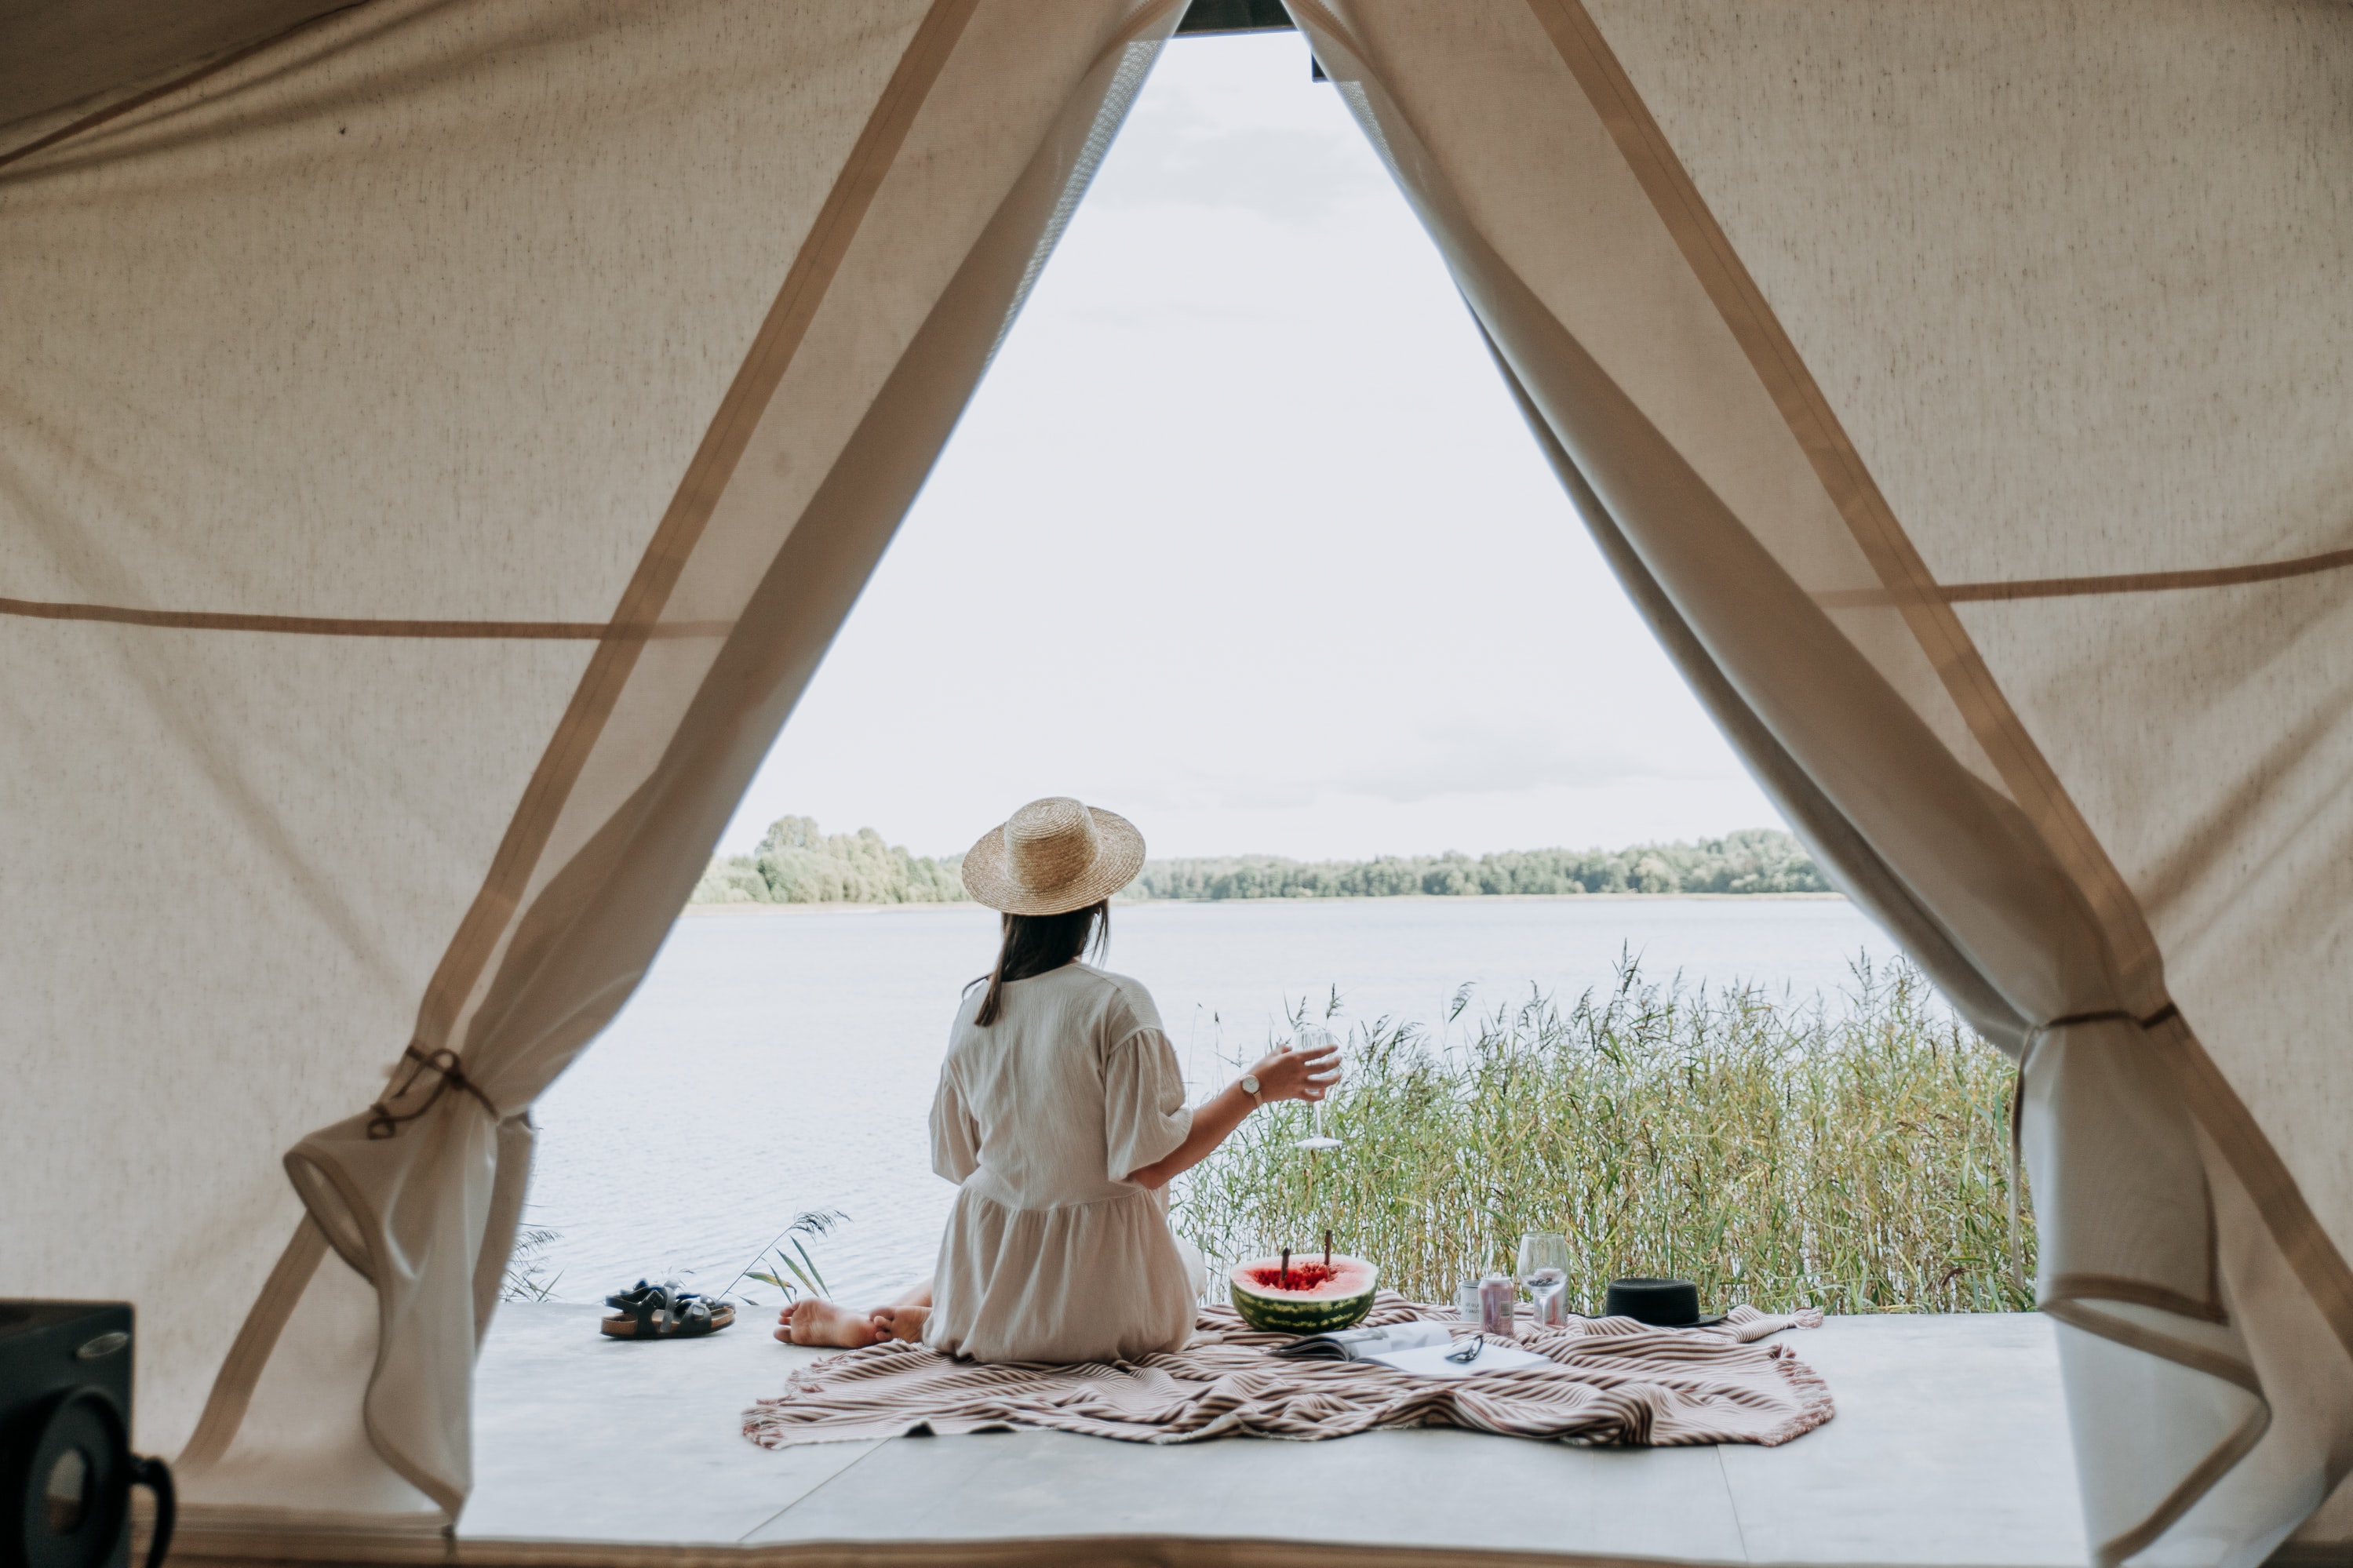 A woman by a lake on a dock pictured from inside a tent